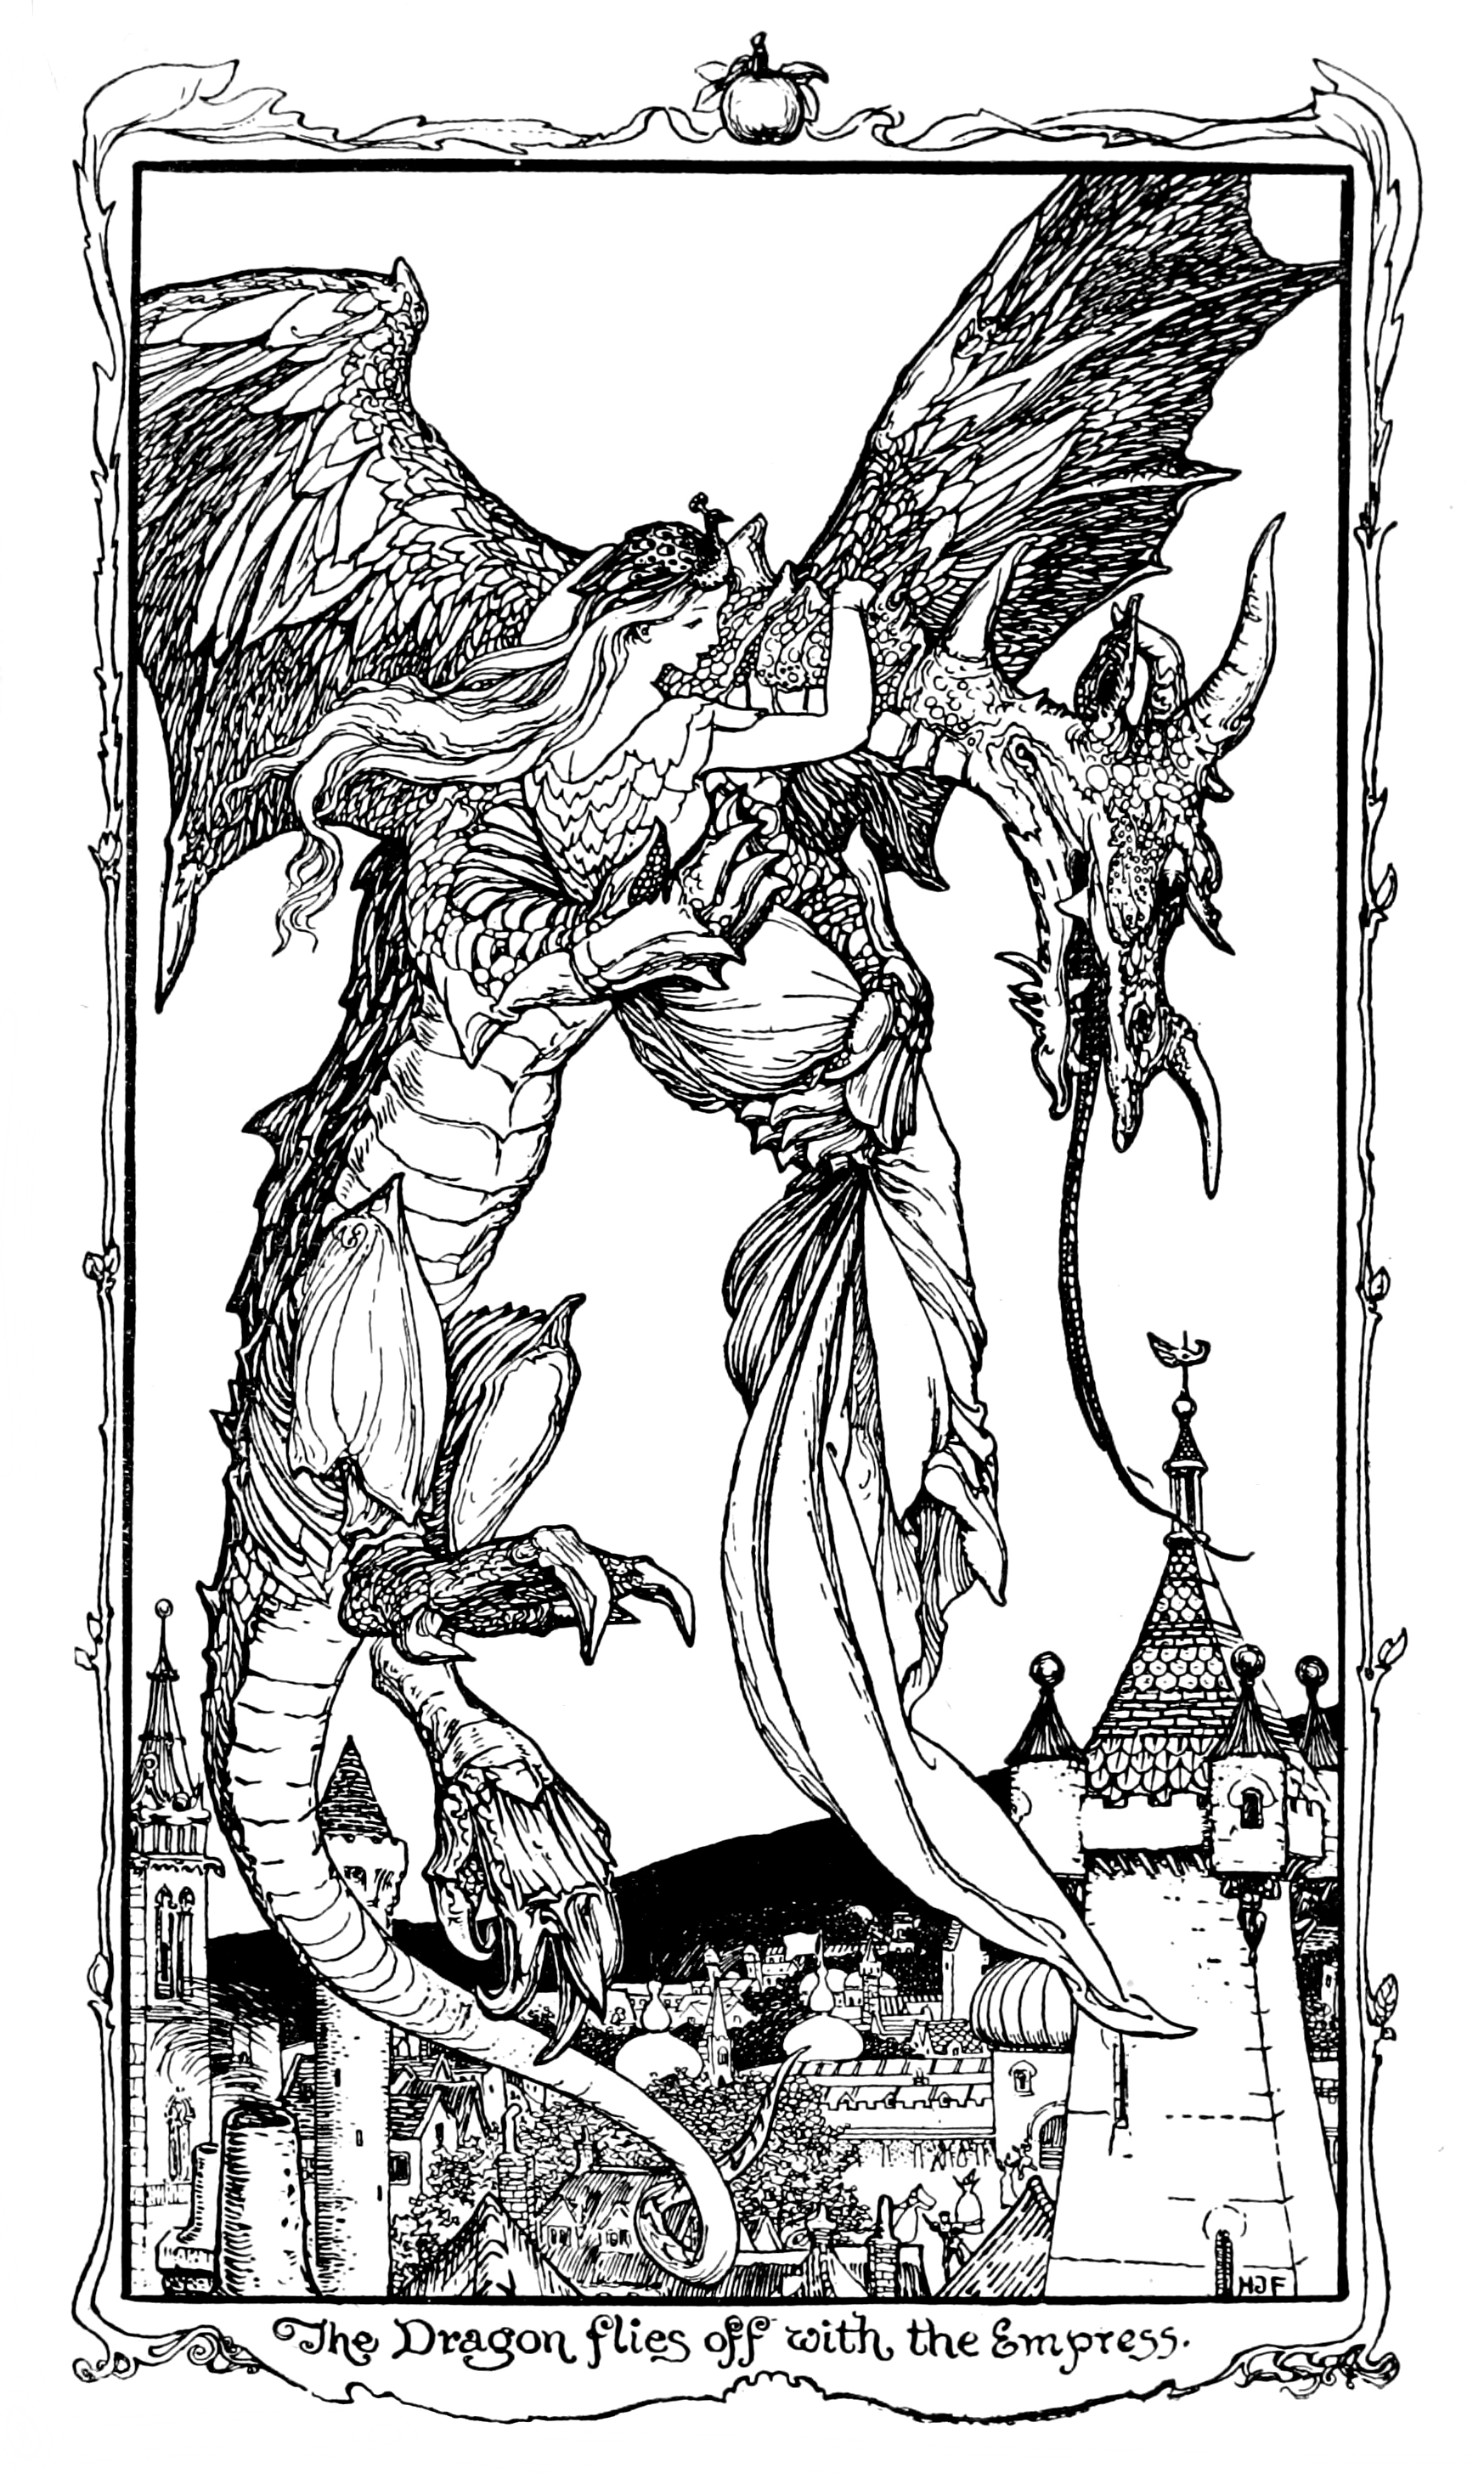 Henry Justice Ford - The violet fairy book, edited by Andrew Lang, 1906 (illustration 4)